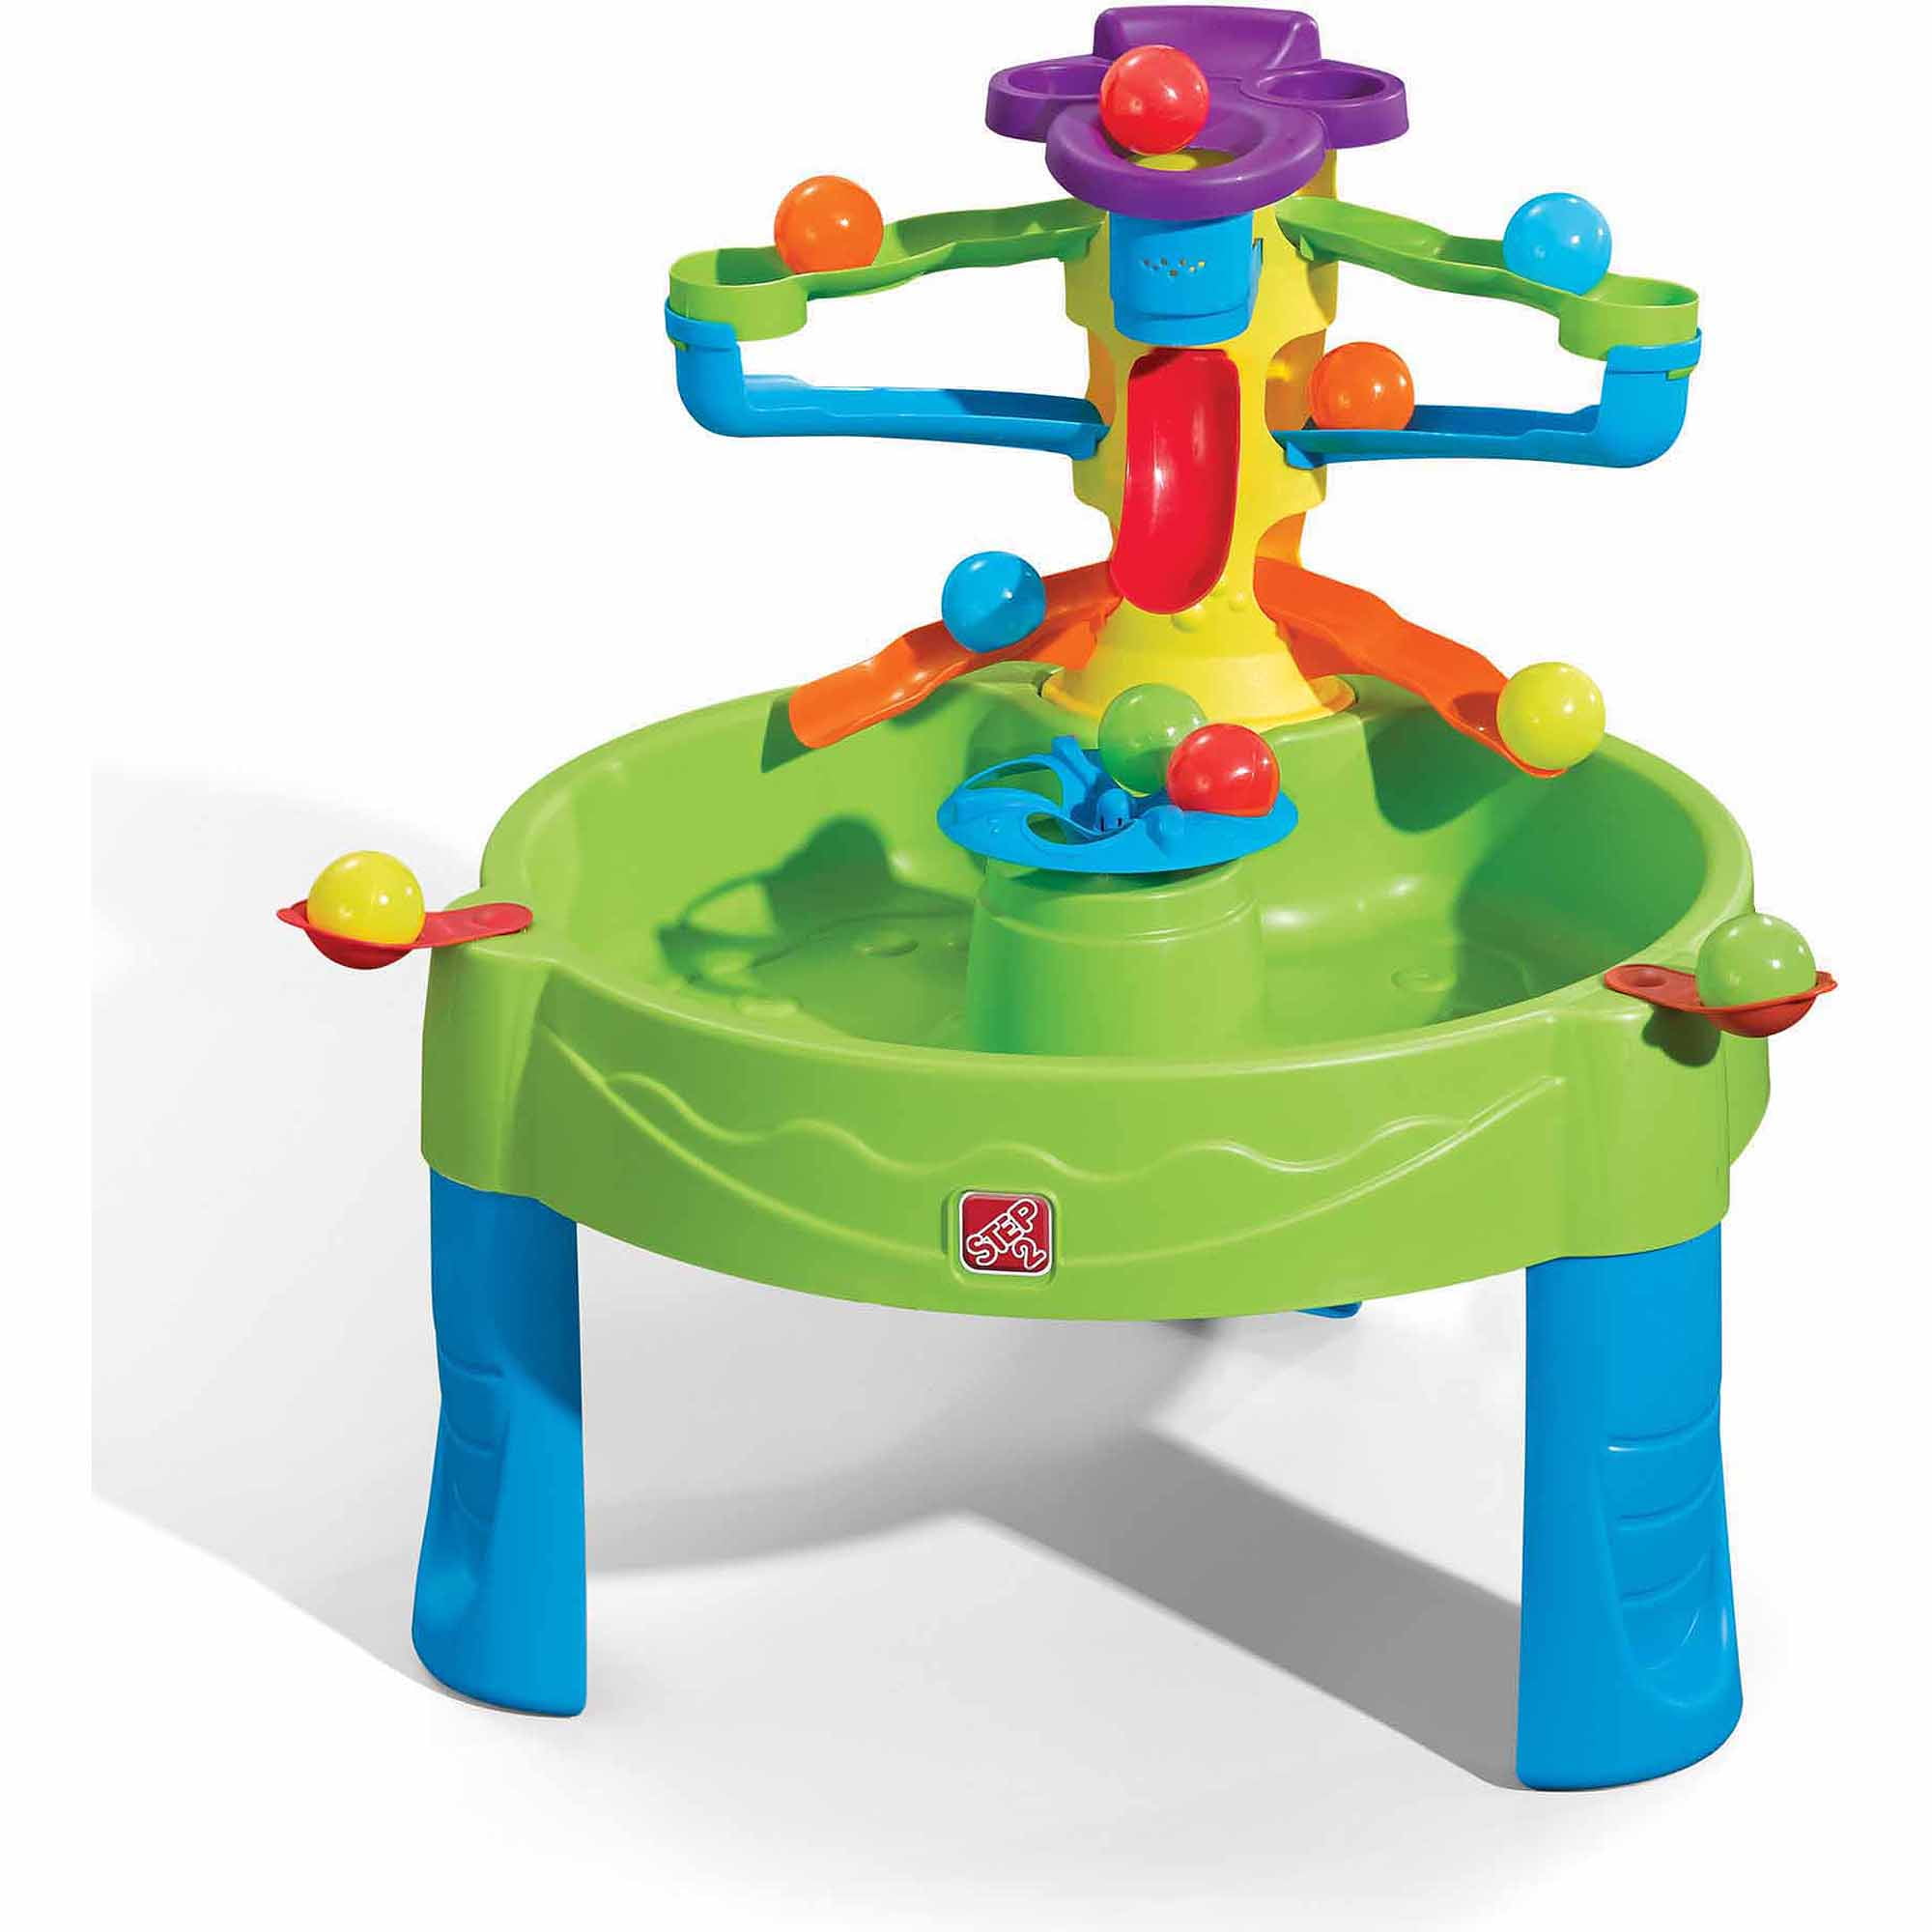 Step2 Busy Ball Water Table With Ten Balls And Water Scoops Walmartcom Walmartcom